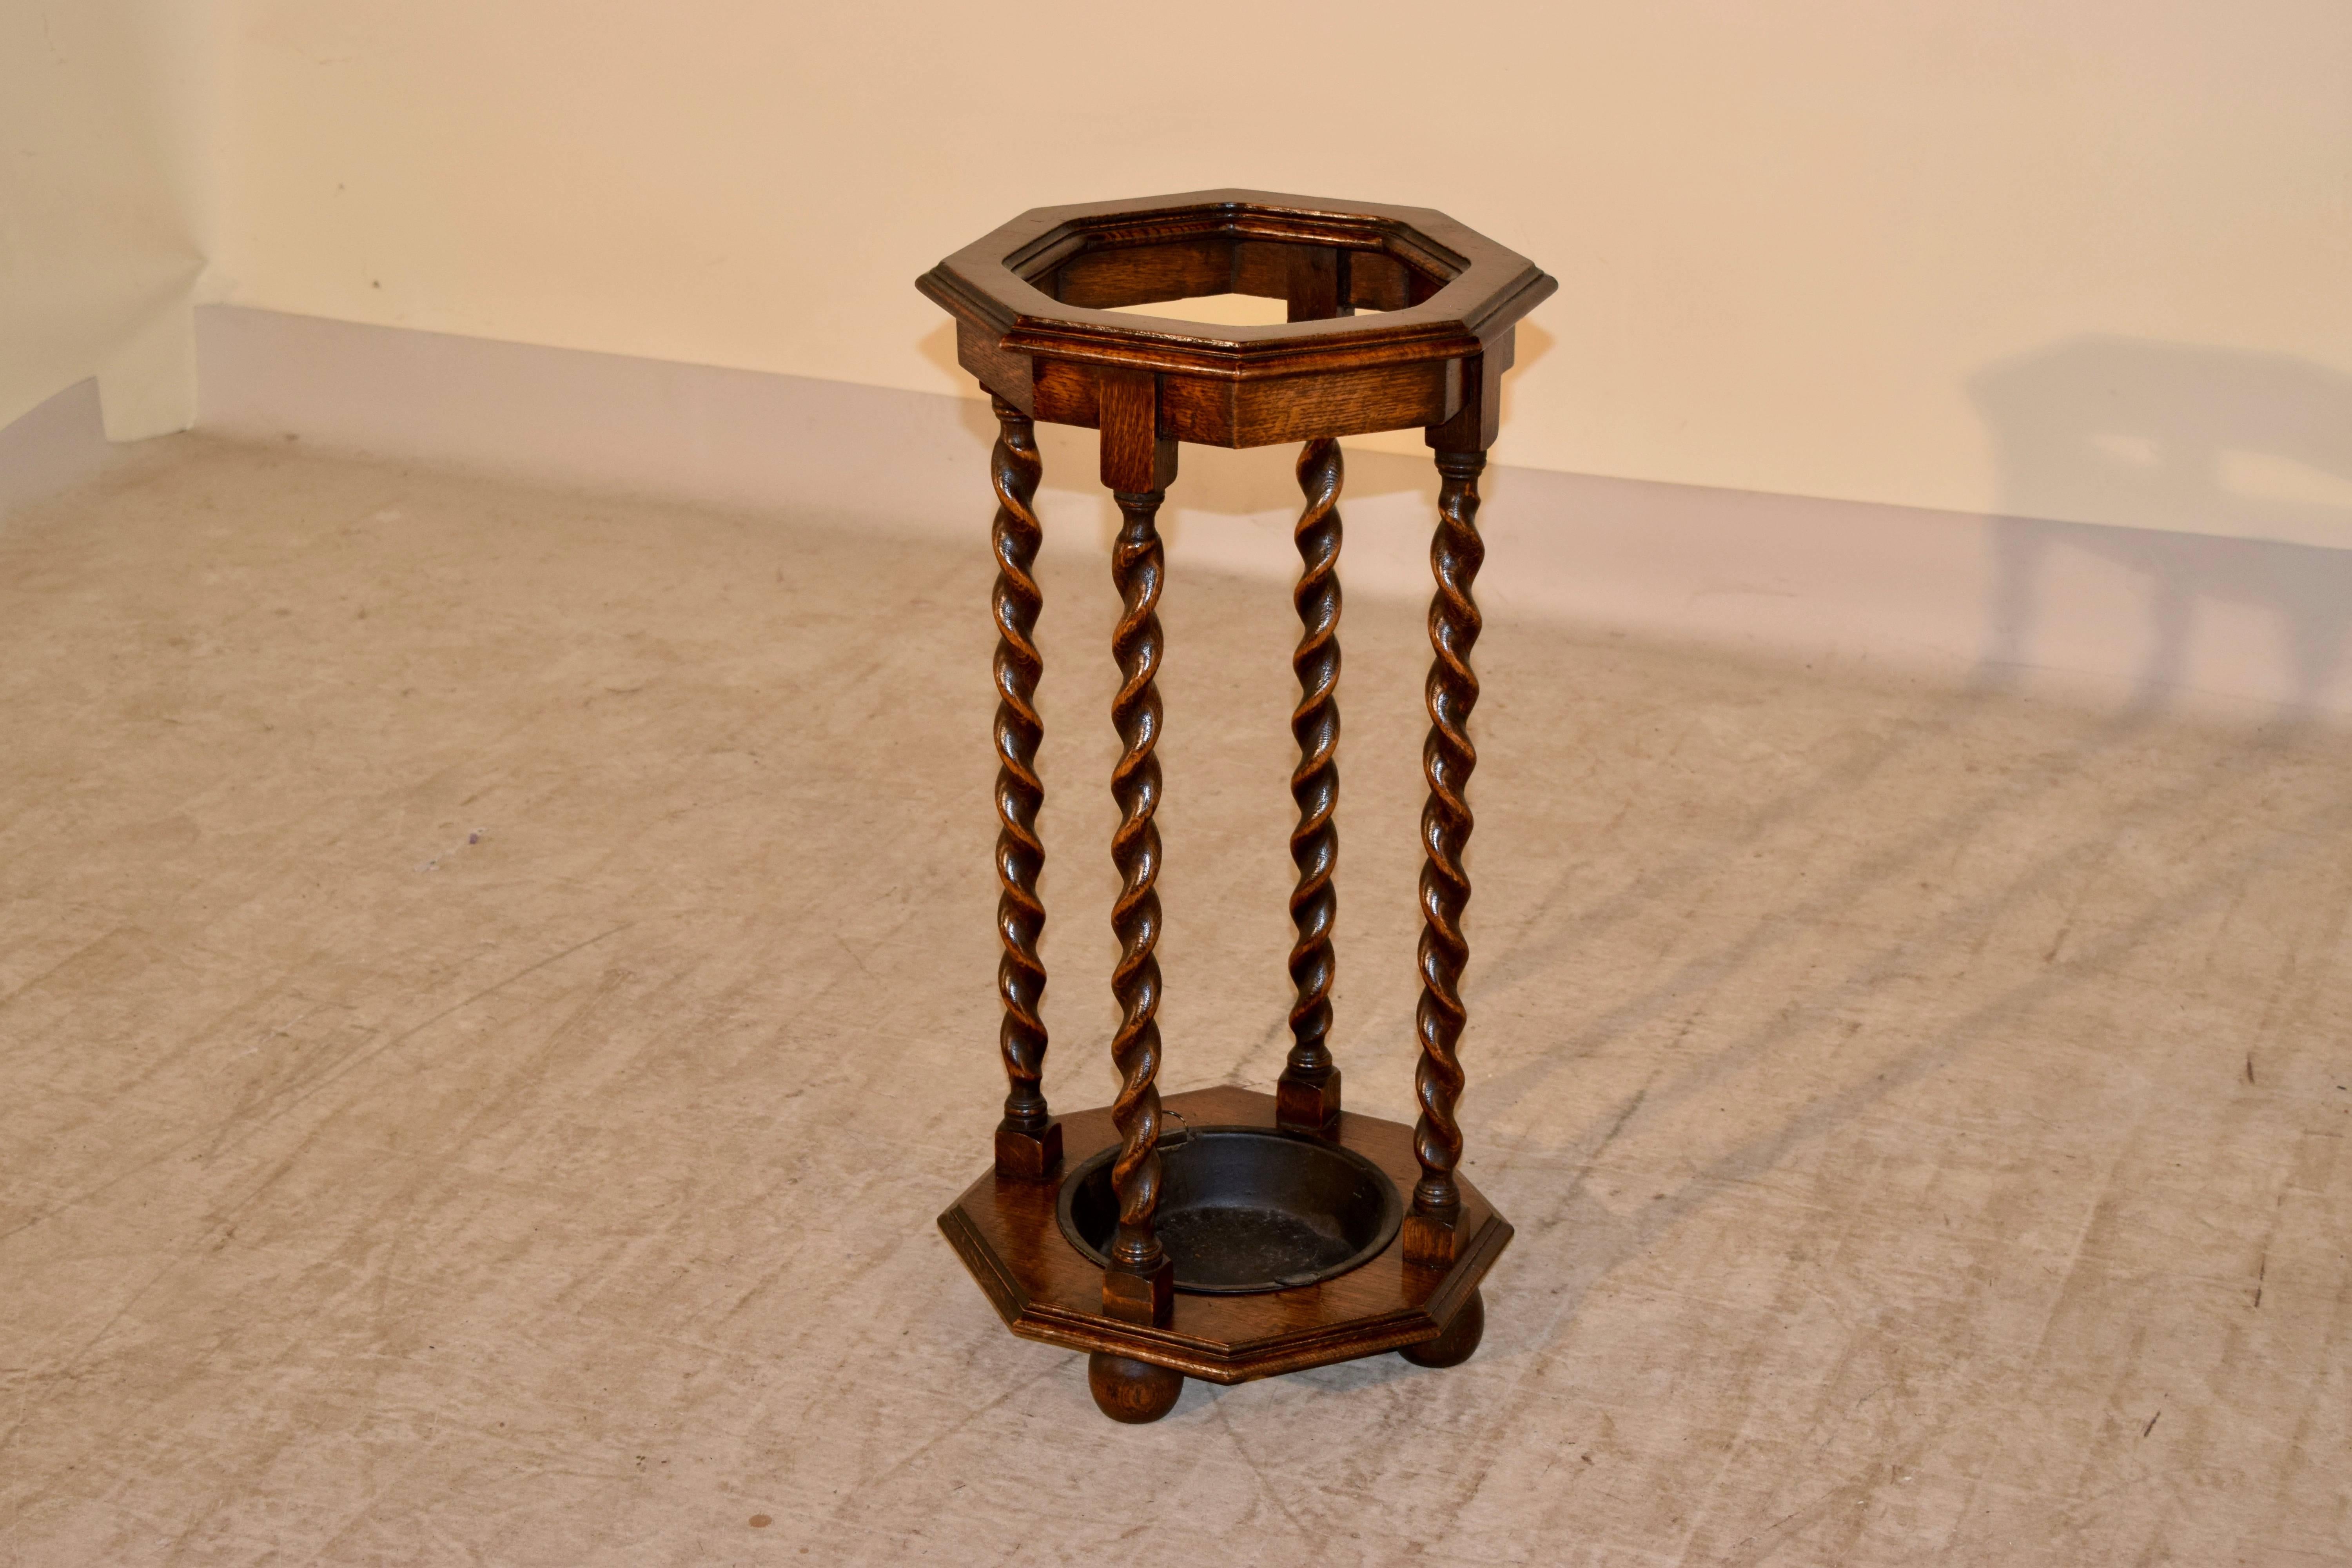 Late 19th Century English oak umbrella stand with an octagonal shaped top and base , which are beveled around the edge, and separated by hand-turned barley twist legs.